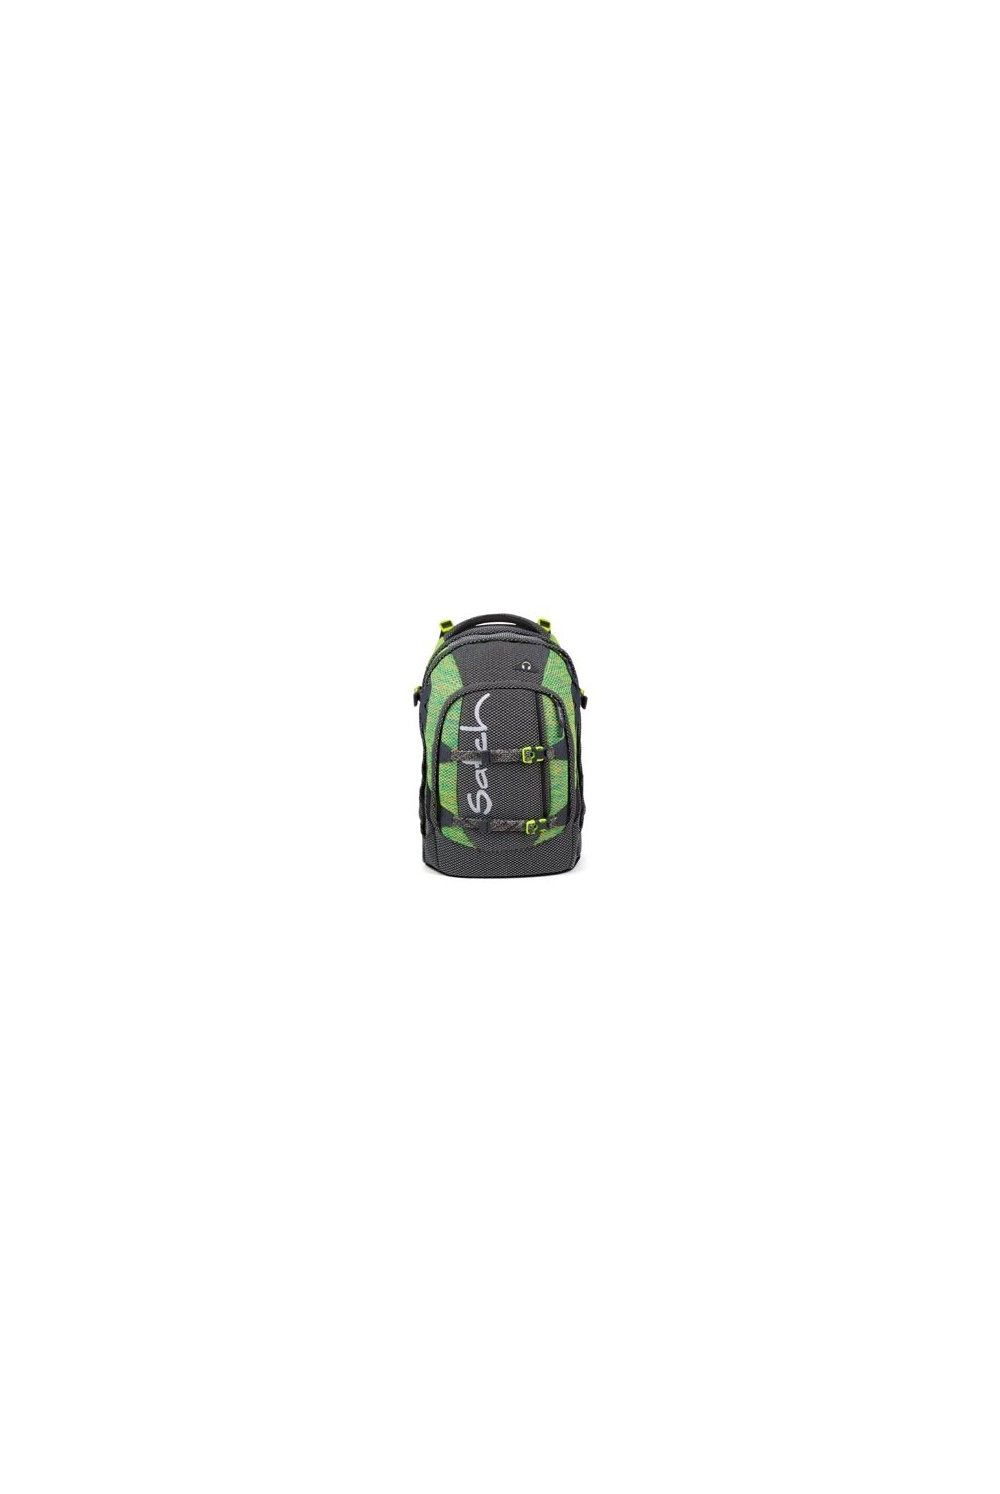 Satch school backpack Hype Limited Edition